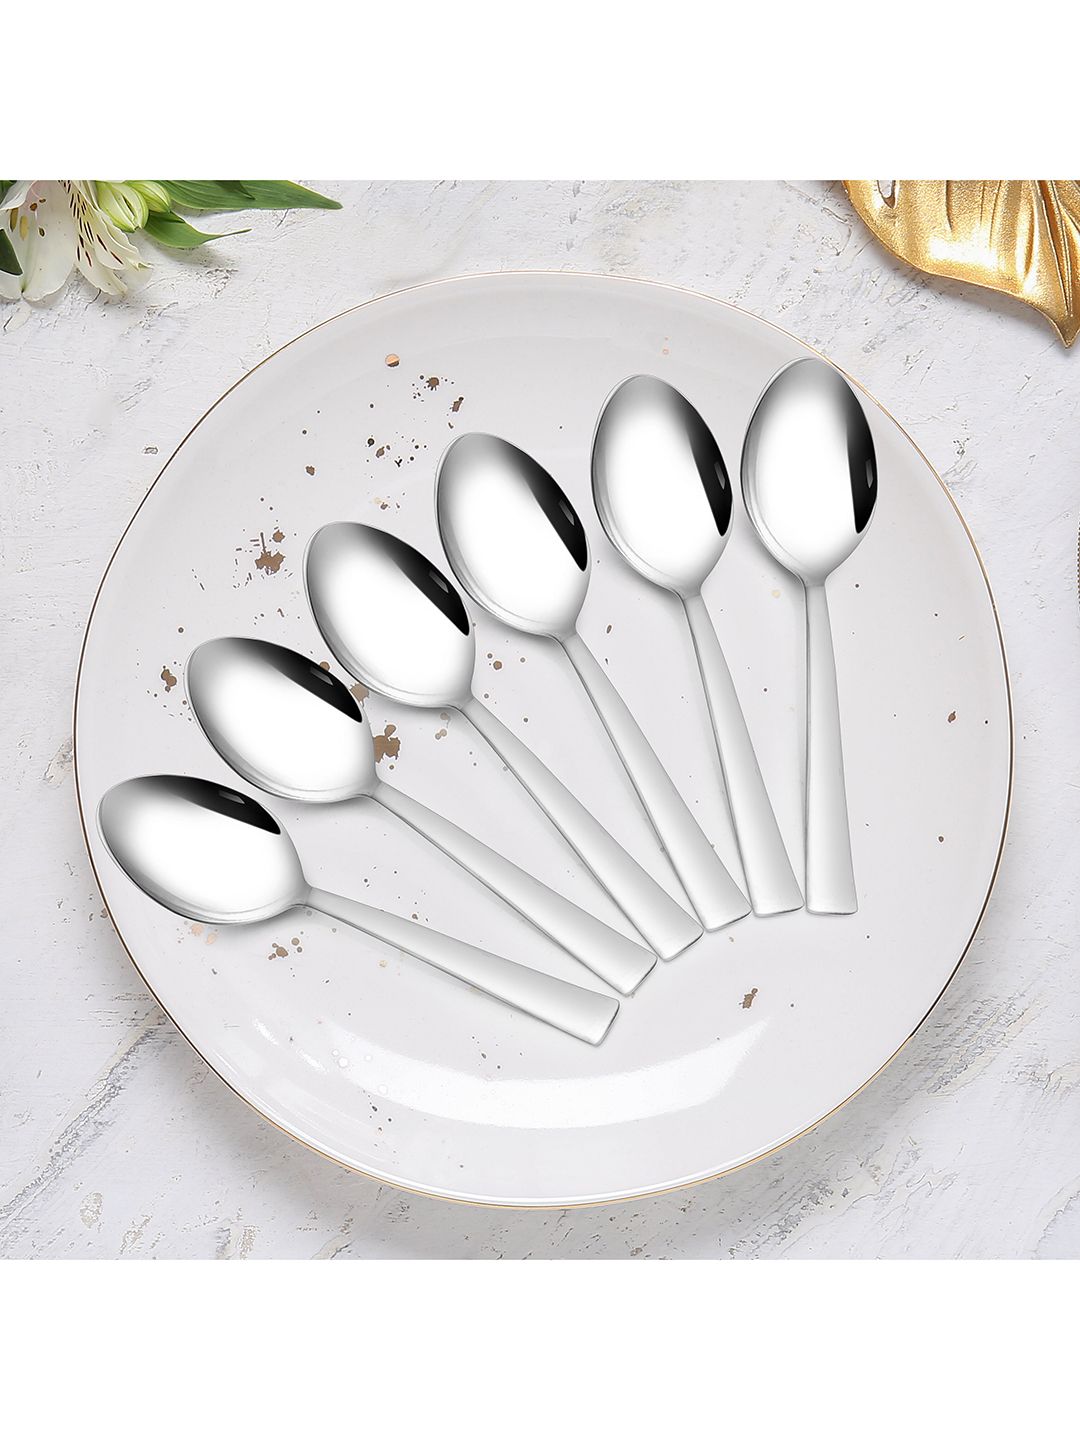 Athome by Nilkamal Silver-Toned Set Of 6 Solid Table Spoons Price in India